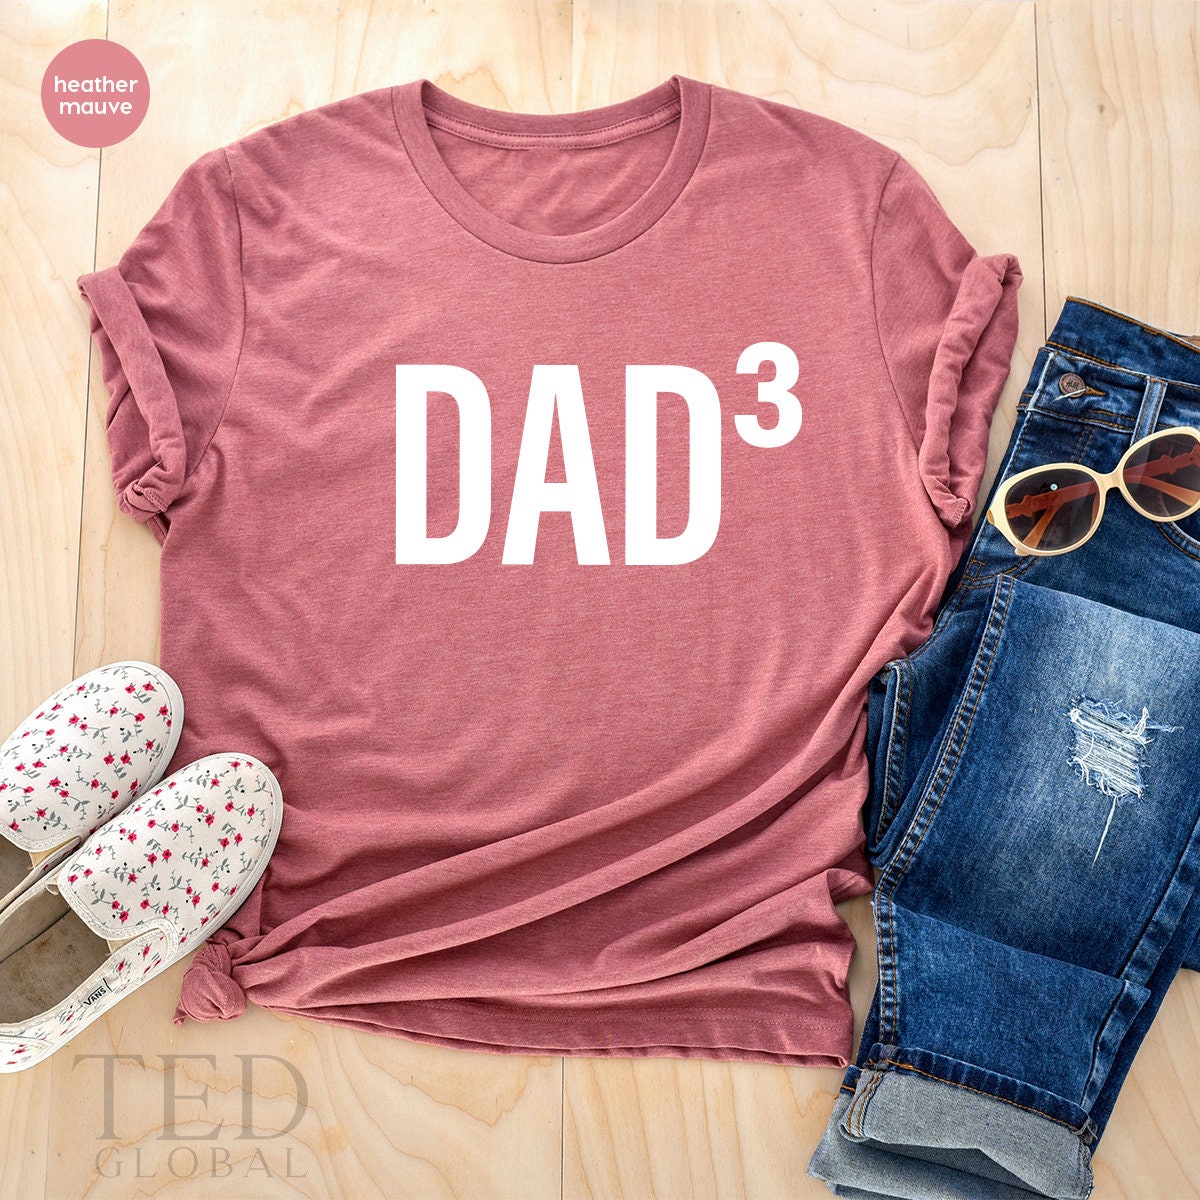 Funny Dad Shirt, Dad Of Three Boys Tee, Dad Cubed Shirt, Dad3 TShirt, Father's Day Shirt, Dad Of 3 Daughter Shirt, Best Father Gift - Fastdeliverytees.com